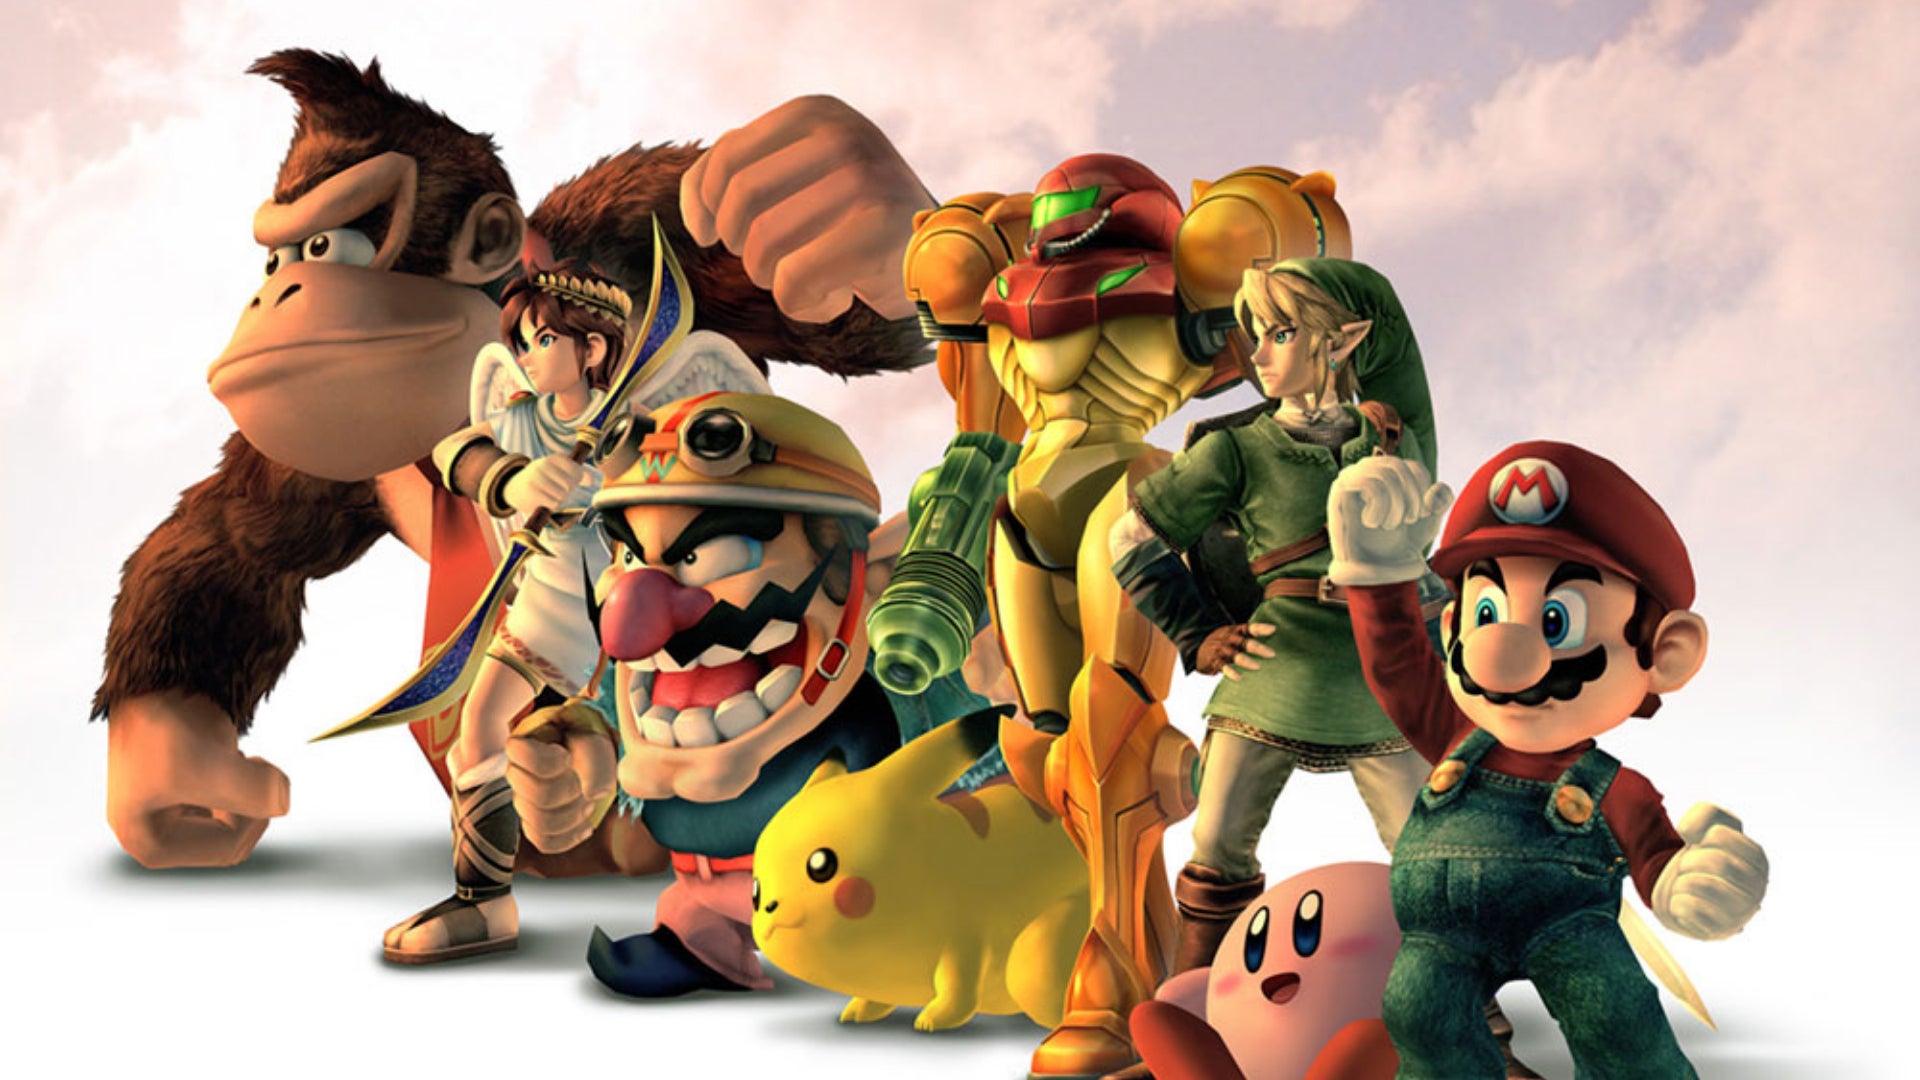 A roster of characters from Super Smash Bros. Brawl are shown, including Donkey Kong, Mario, Samus, Link, Kirby, Pikachu, Wario, and more